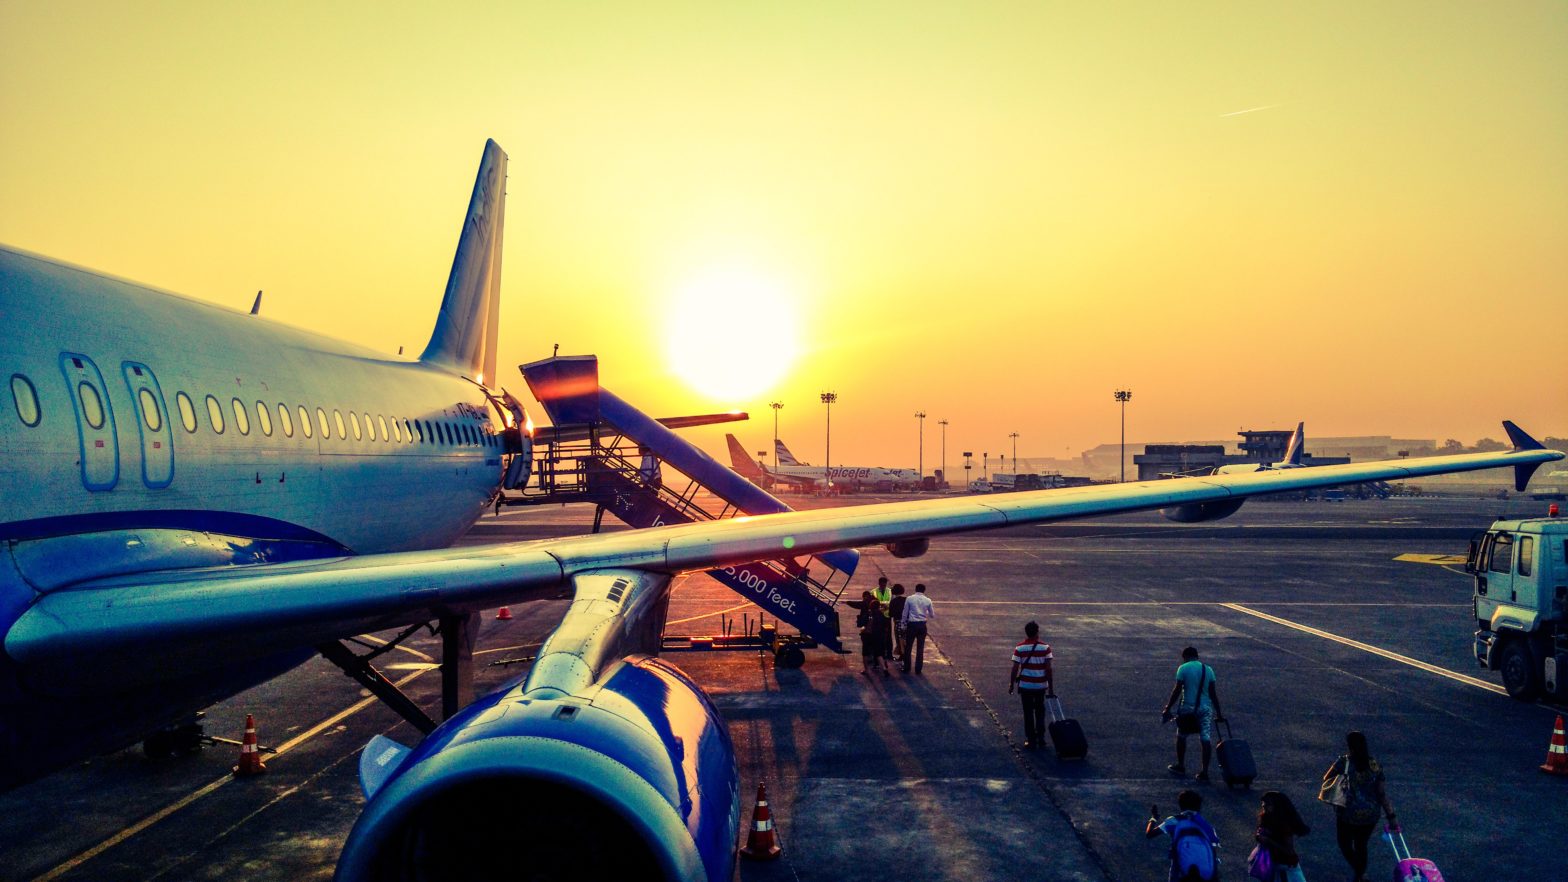 Flight Prices Are Sky High: 7 Ways To Find Cheap Flights